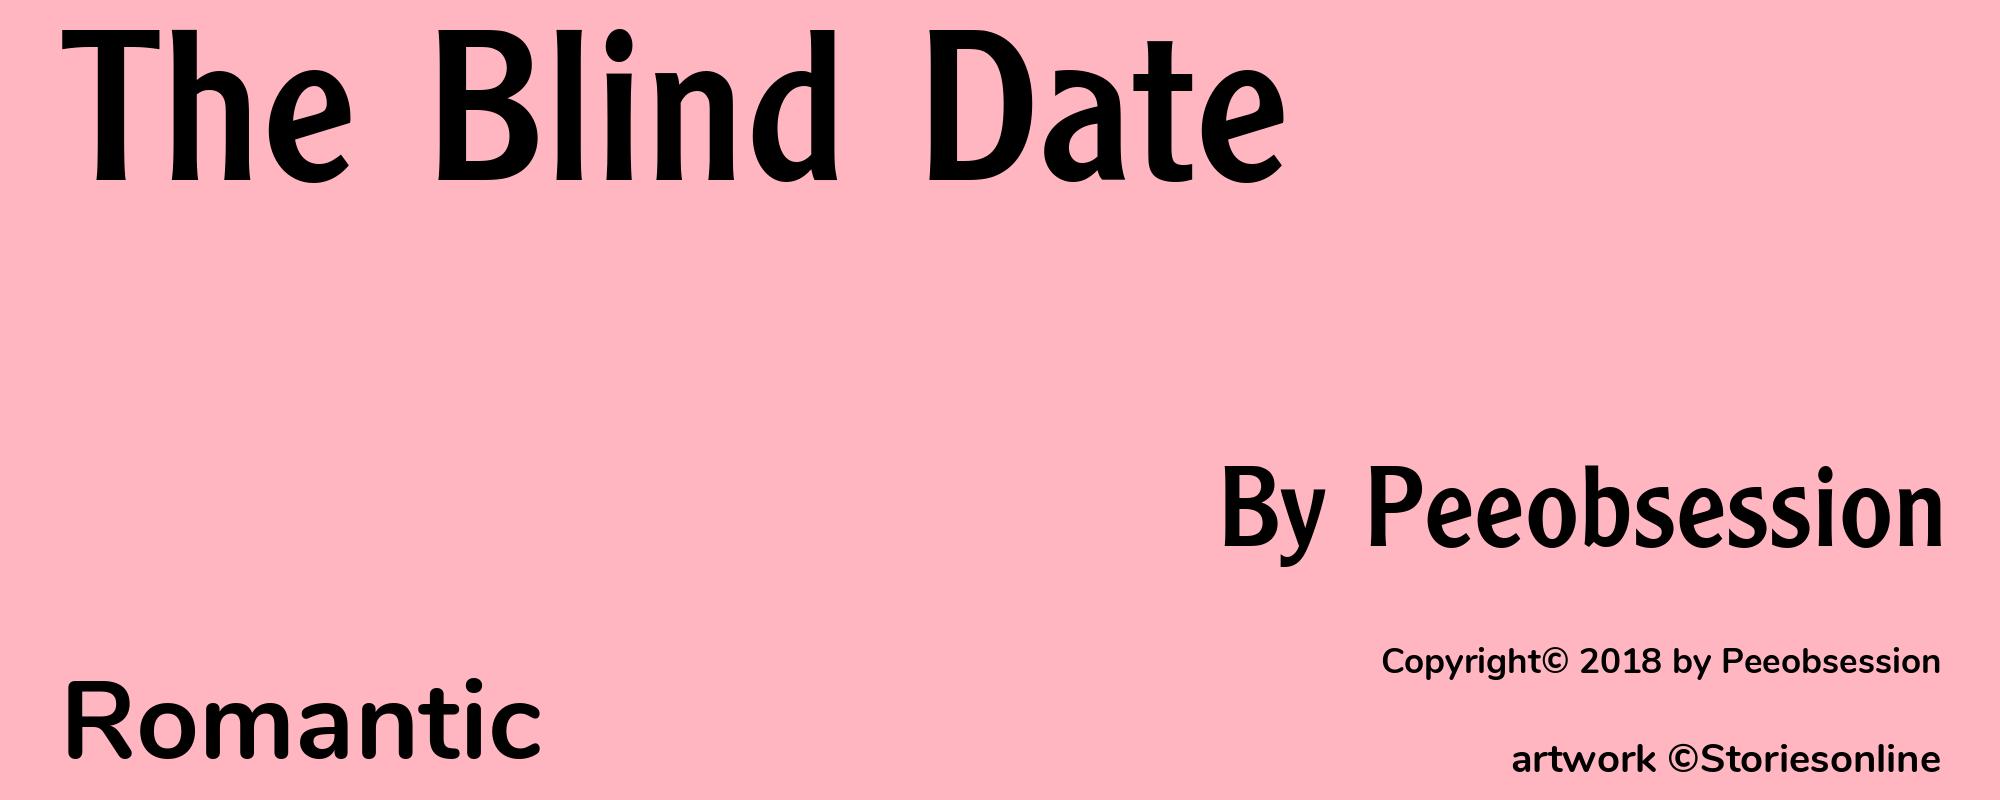 The Blind Date - Cover